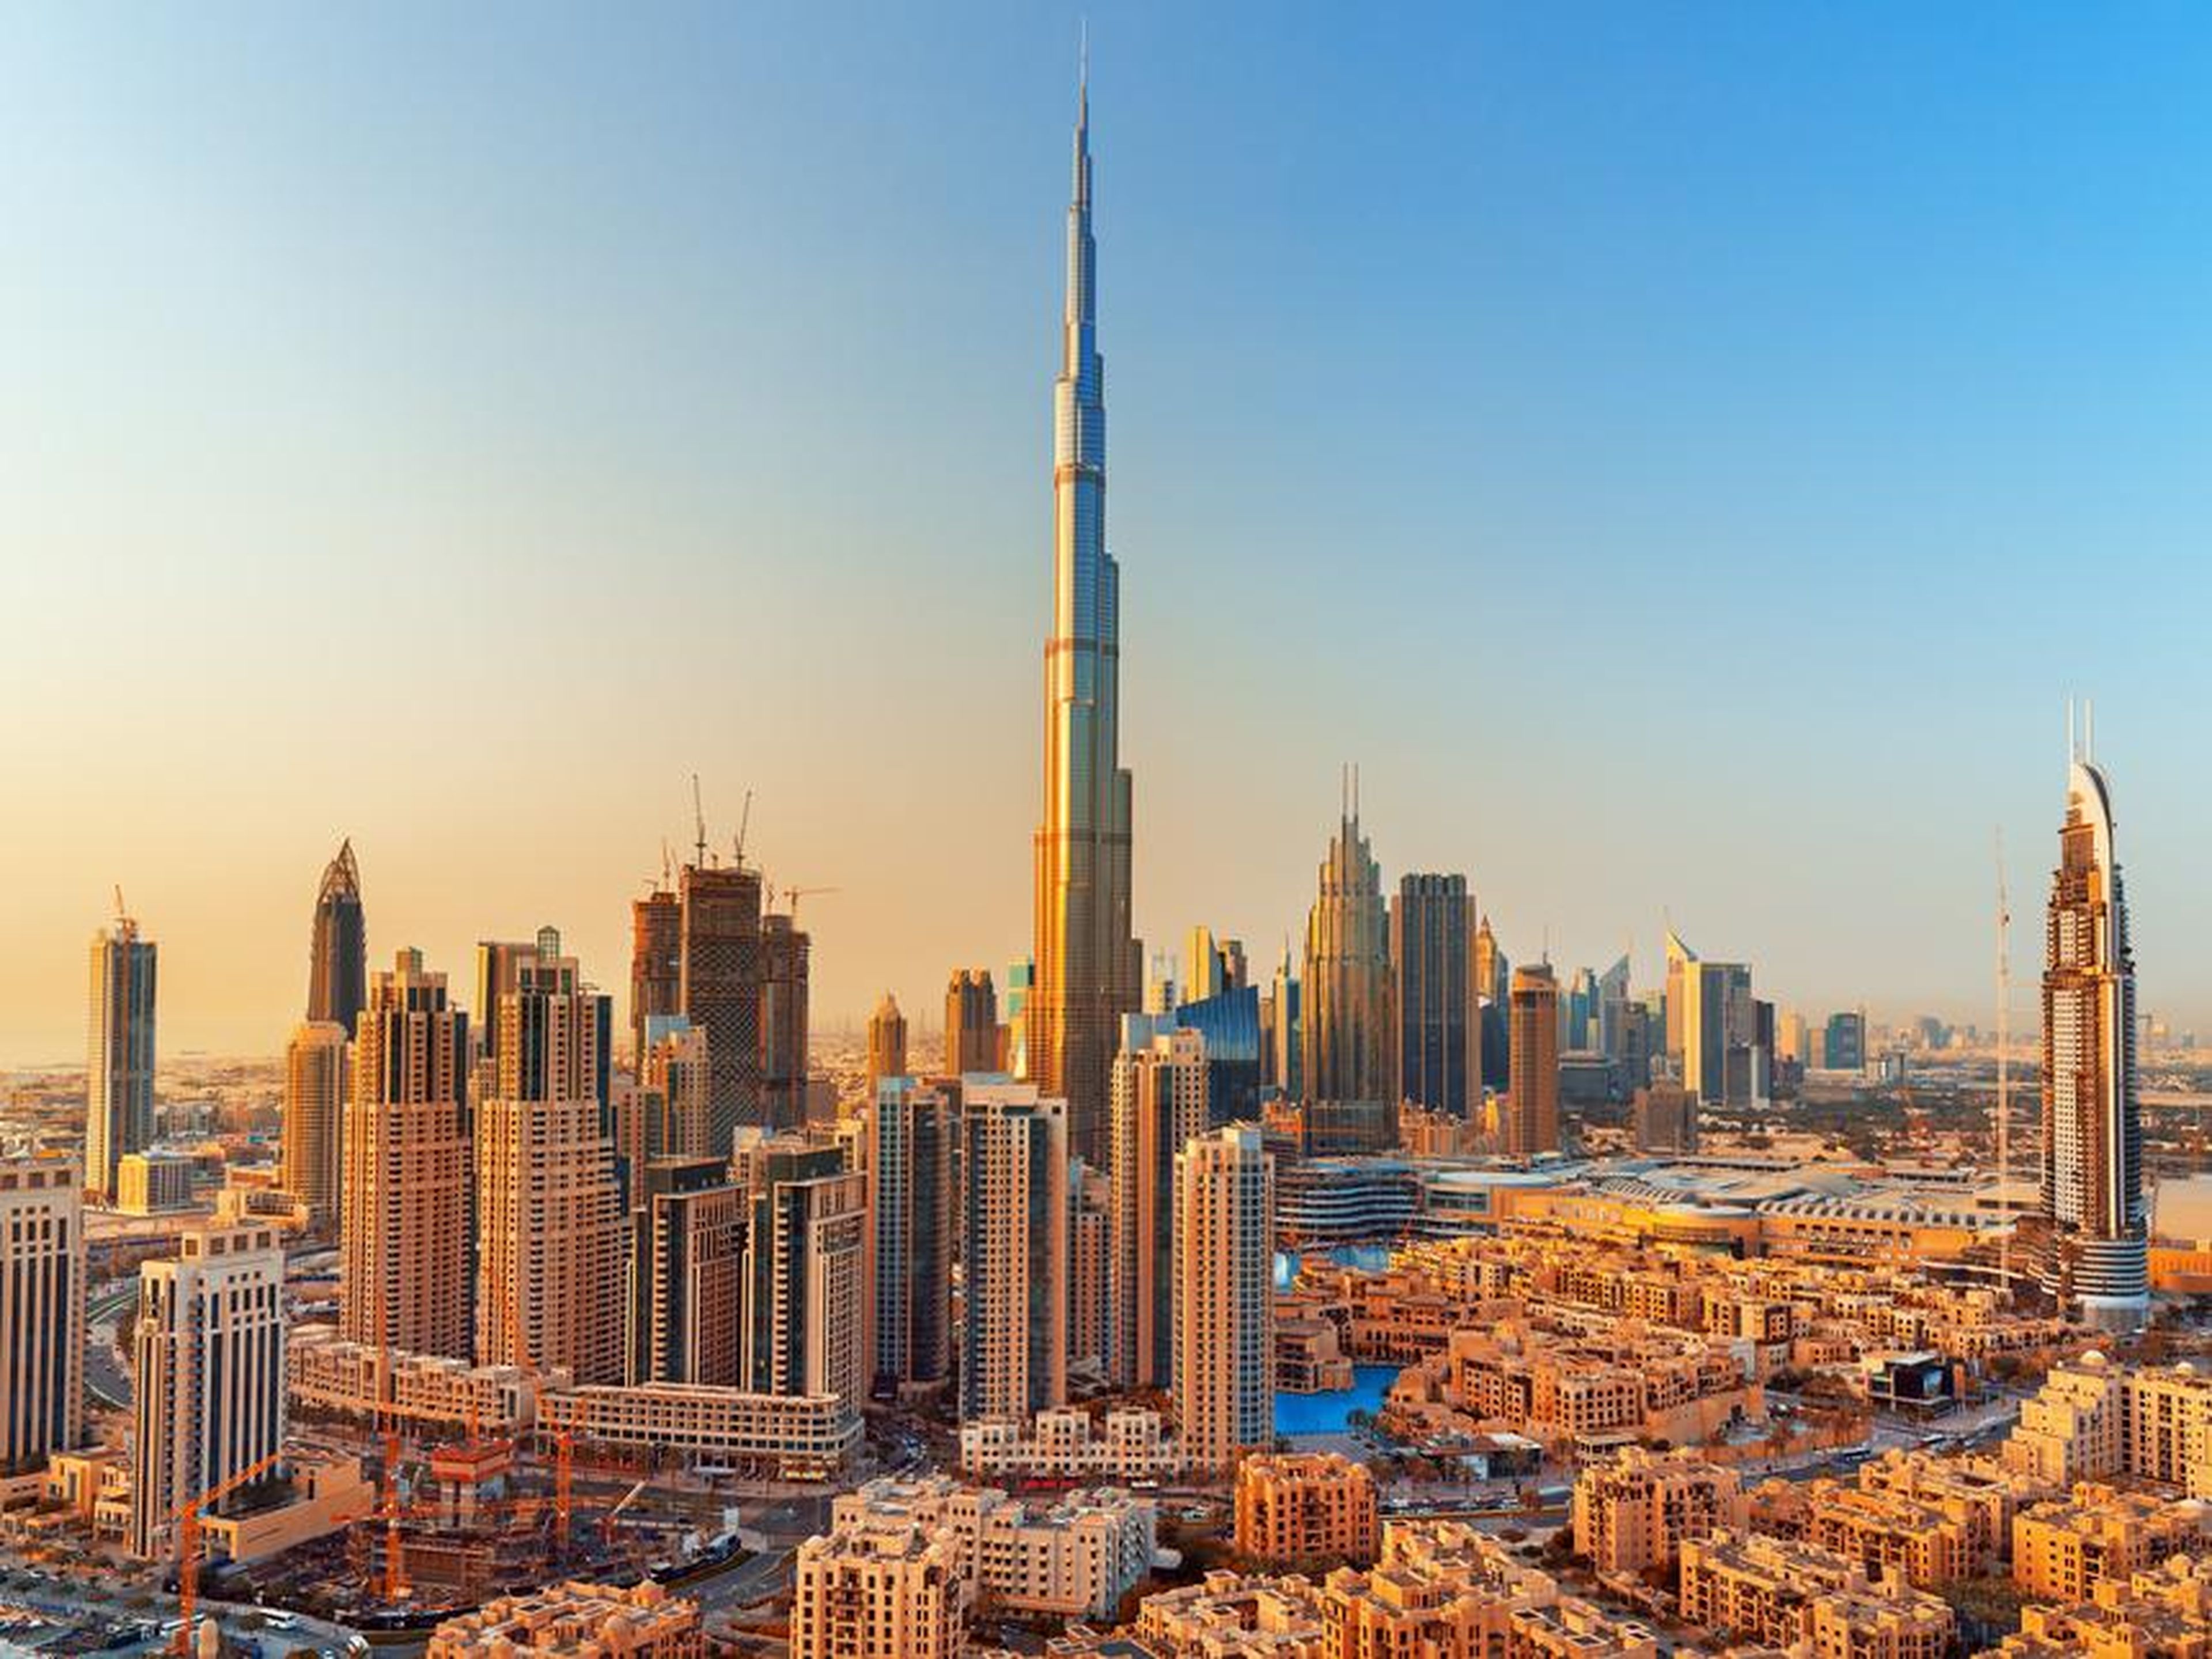 Dubai is known for its luxury shopping and hotels, giant malls, and ultra-modern architecture. Rough Guides calls it "one of the world's most glamorous, spectacular and futuristic urban destinations."